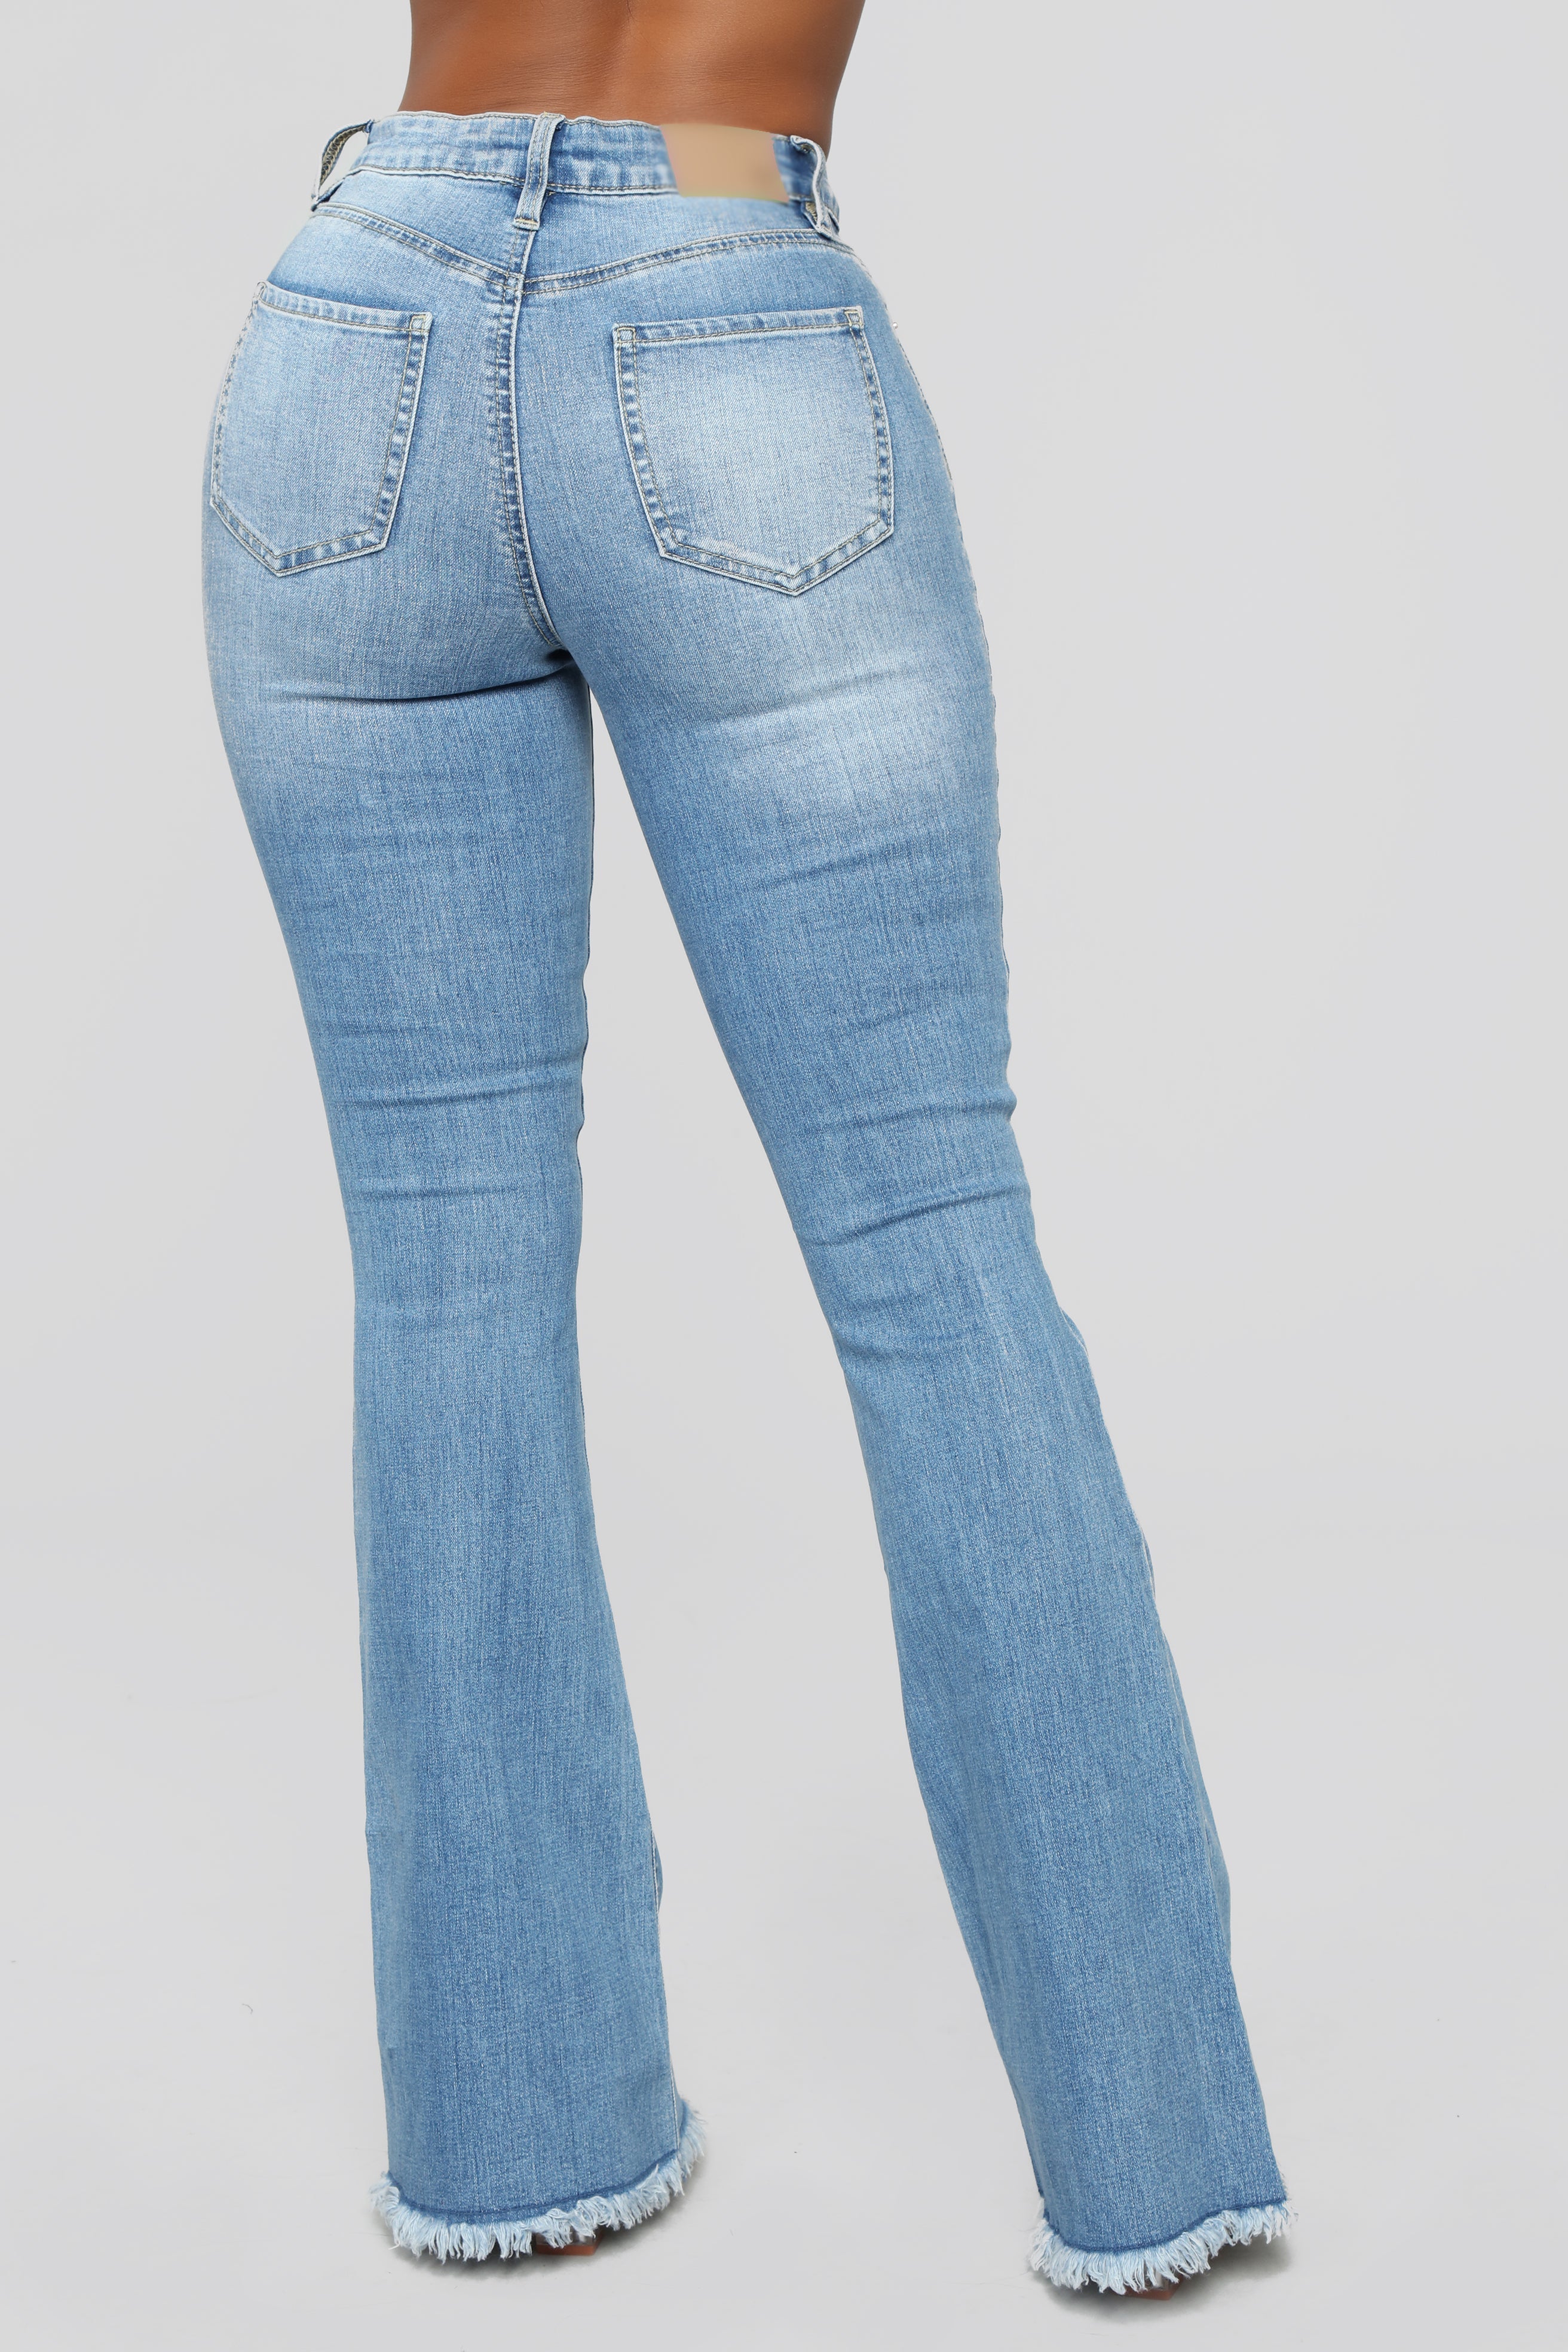 Nothing But The Best Flare Jeans - Medium Blue Wash Ins Street